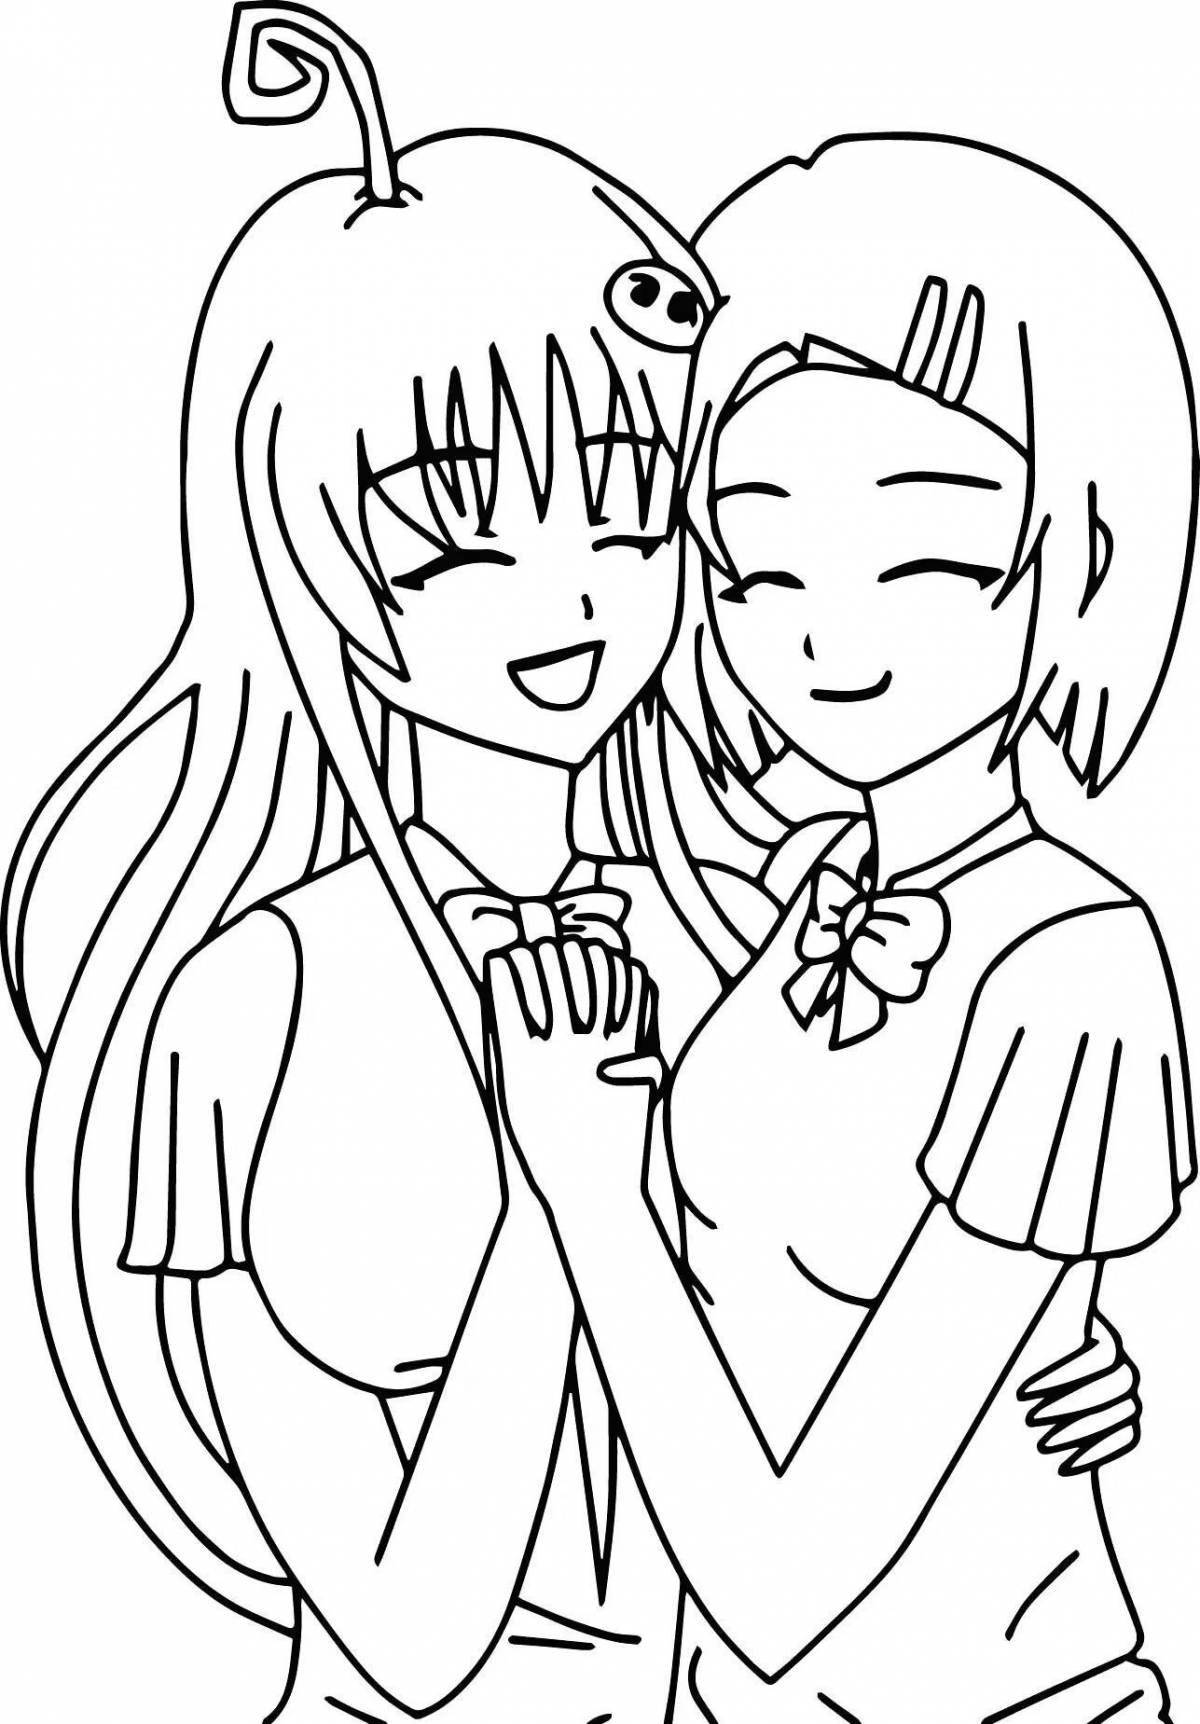 Coloring book two smiling sisters